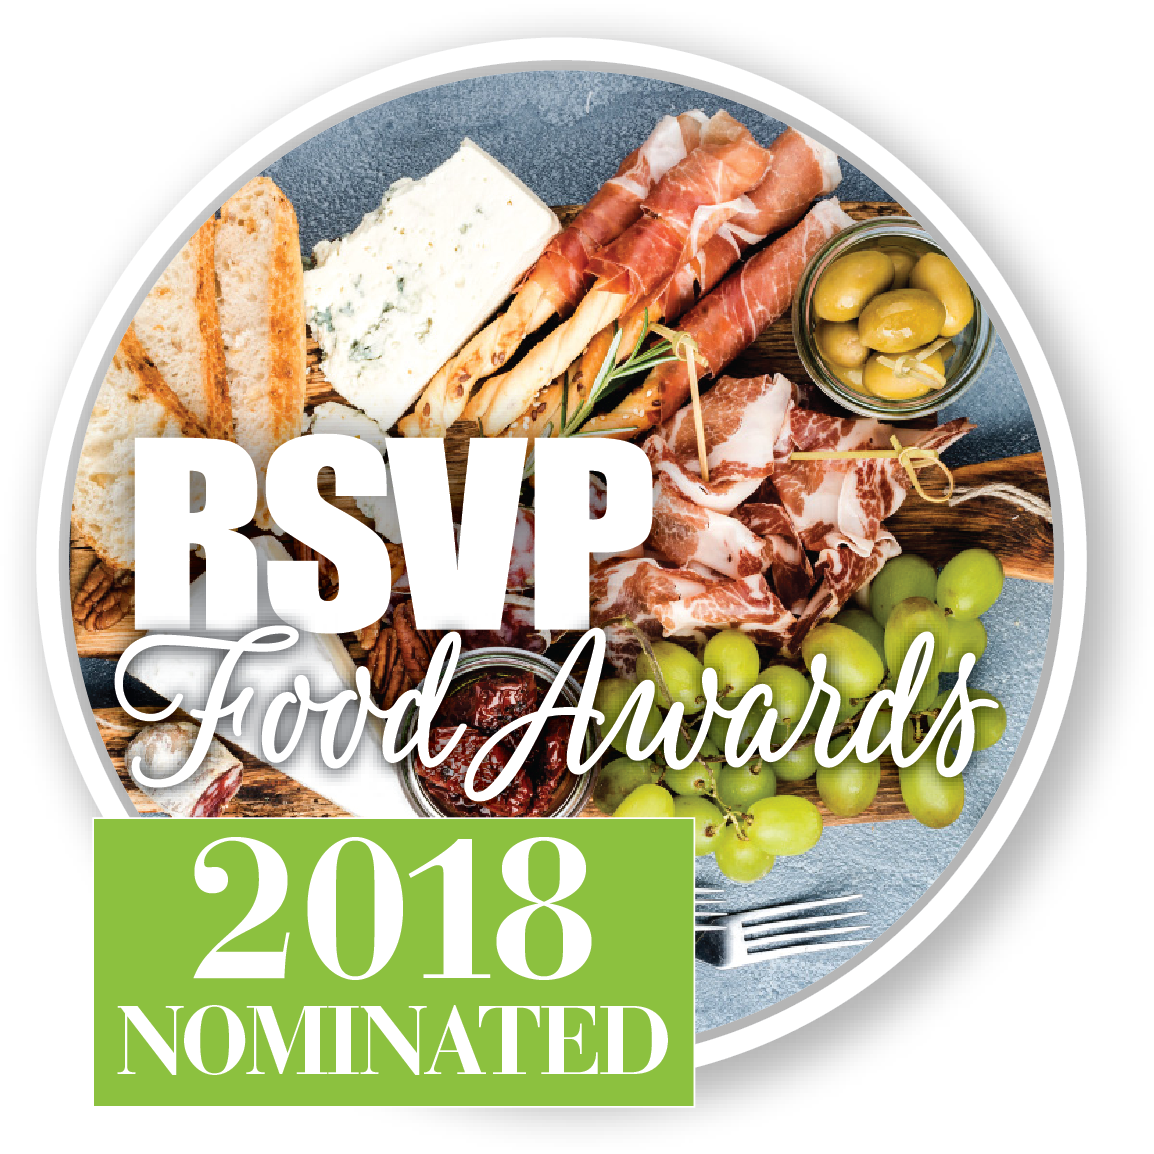 Nominated for the RSVP Food Awards Glastry Farm